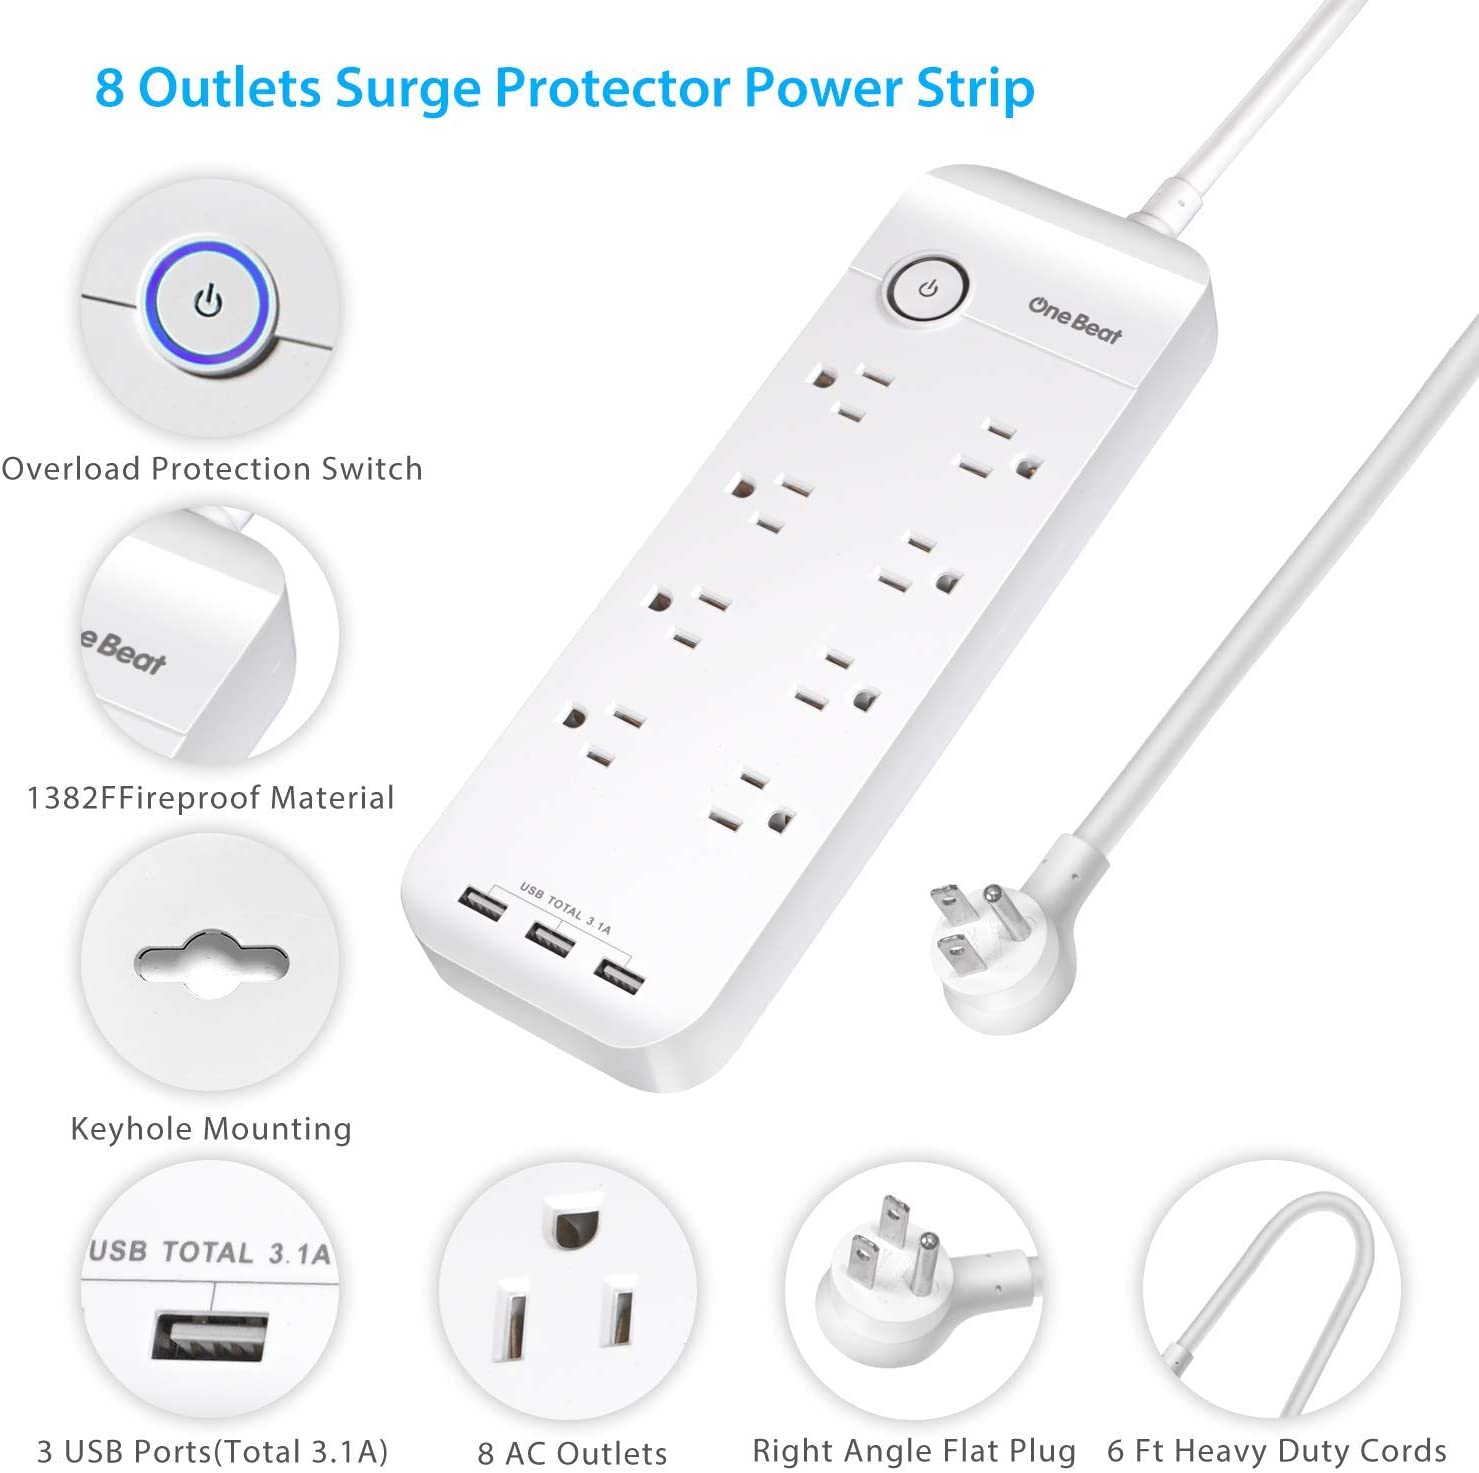 1800 jule surge protector with 8 outlets and 3 USB ports flat 90 degree flush plug $15 with Amazon prime $14.39